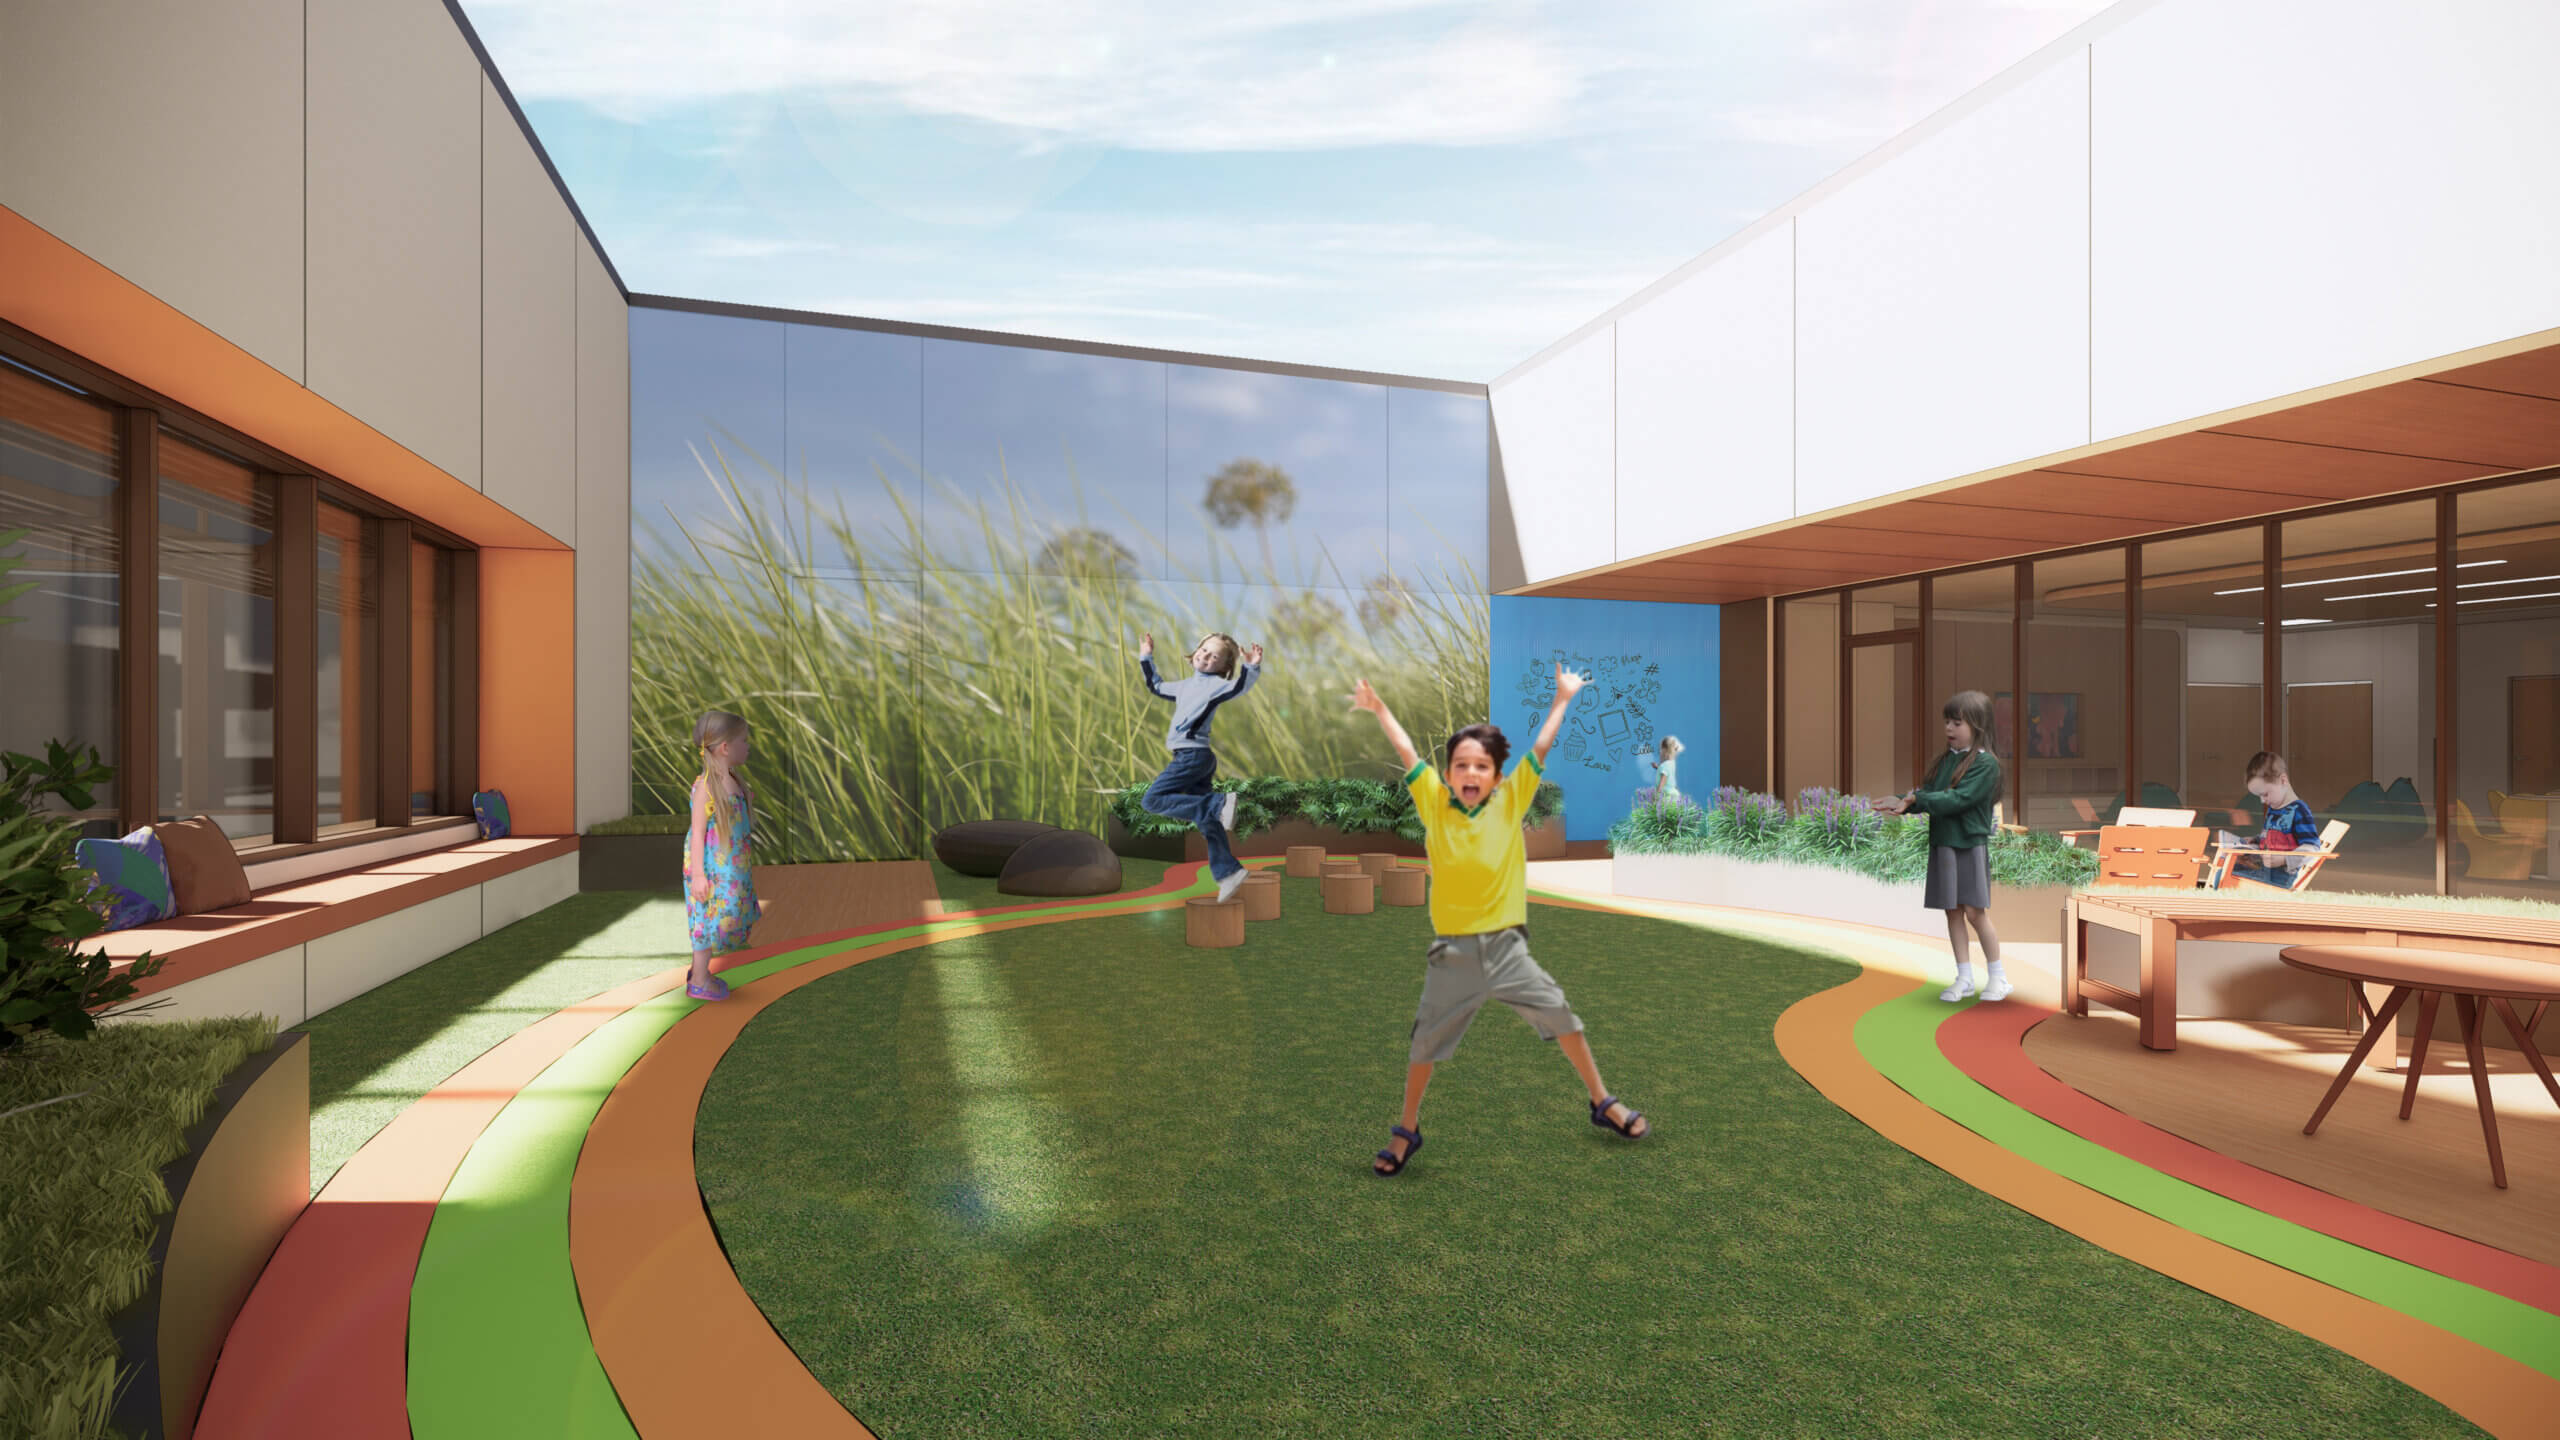 rendering including children using outdoor activity and recreation spaces within the facility design